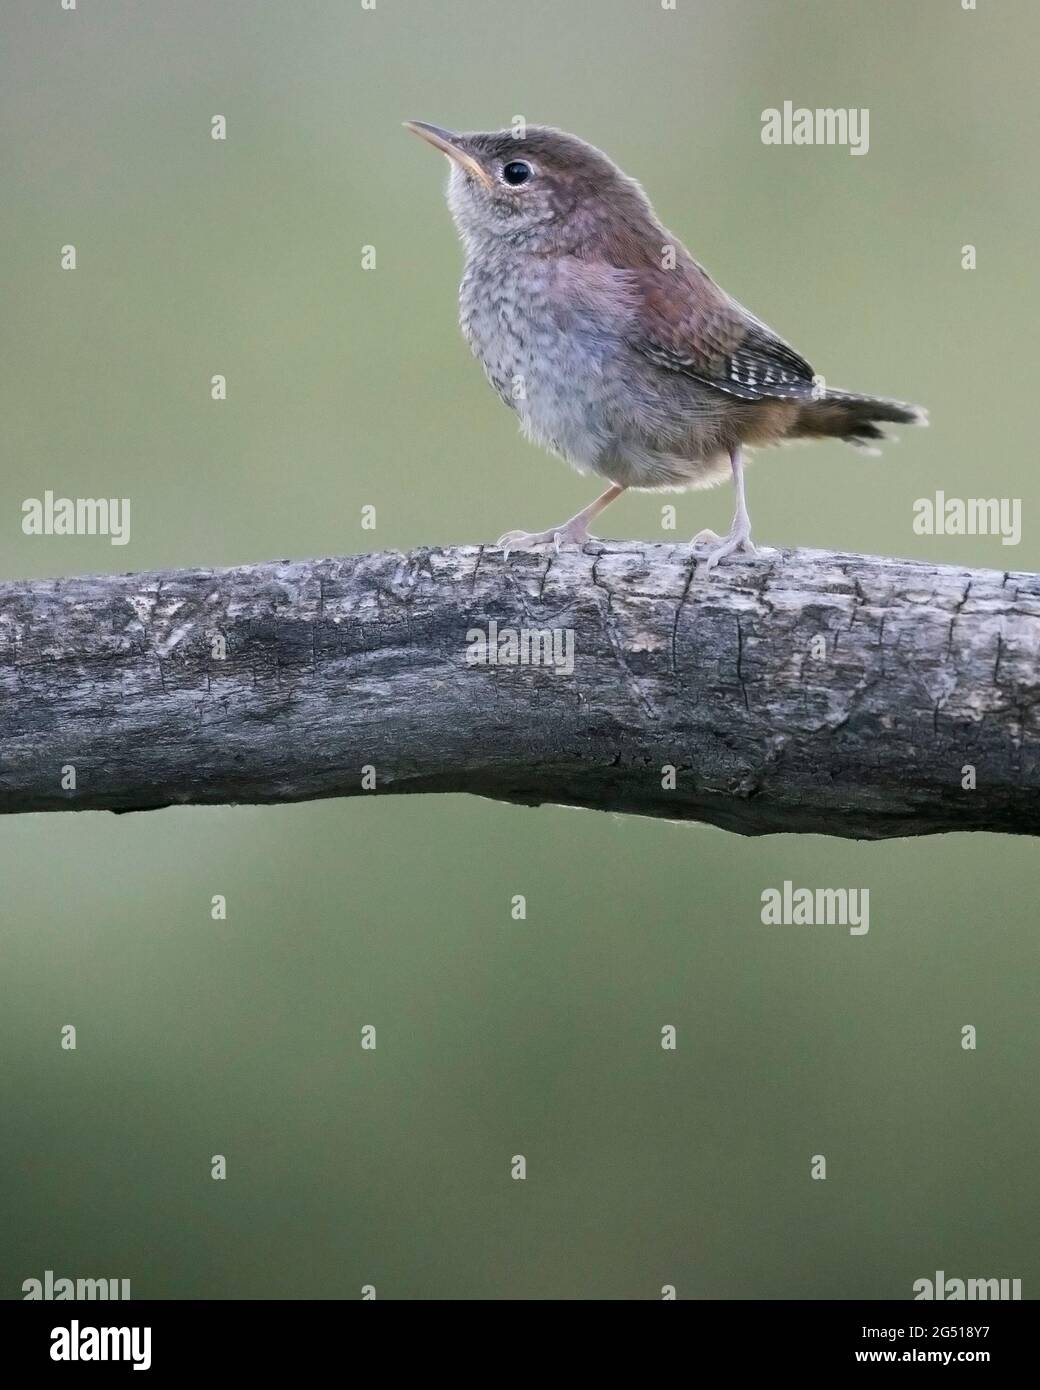 House wren (Troglodytes aedon) perched on a  tree branch Stock Photo